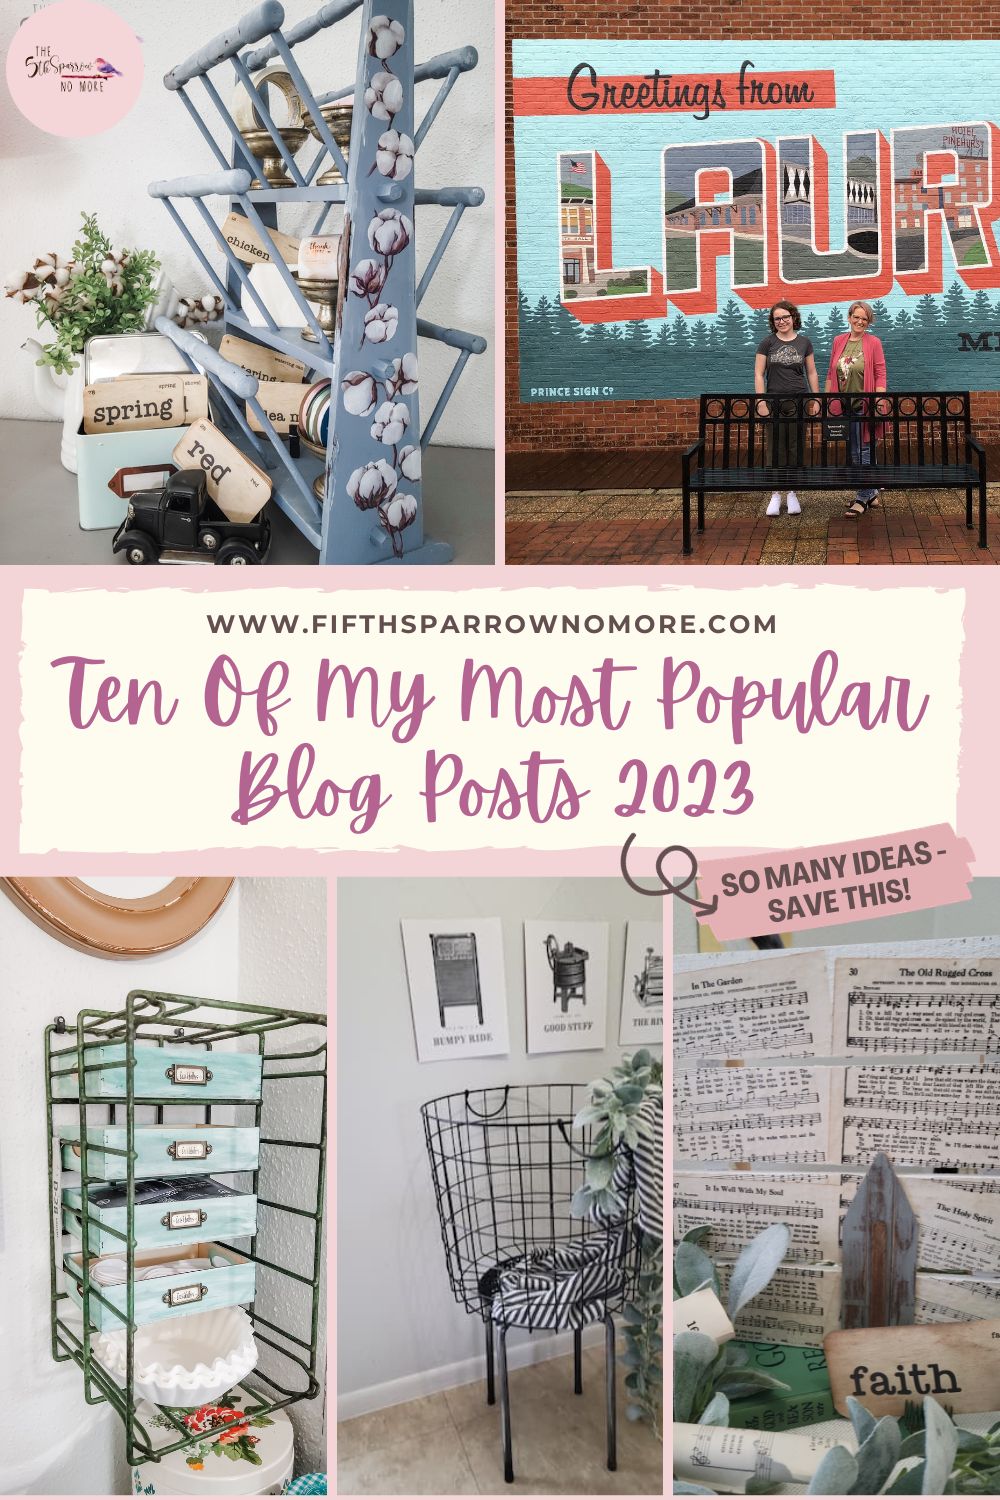 The most popular blog posts in 2023 embody the "fifth sparrow no more" idea which is to find thrifty ways to makeover furniture and décor.